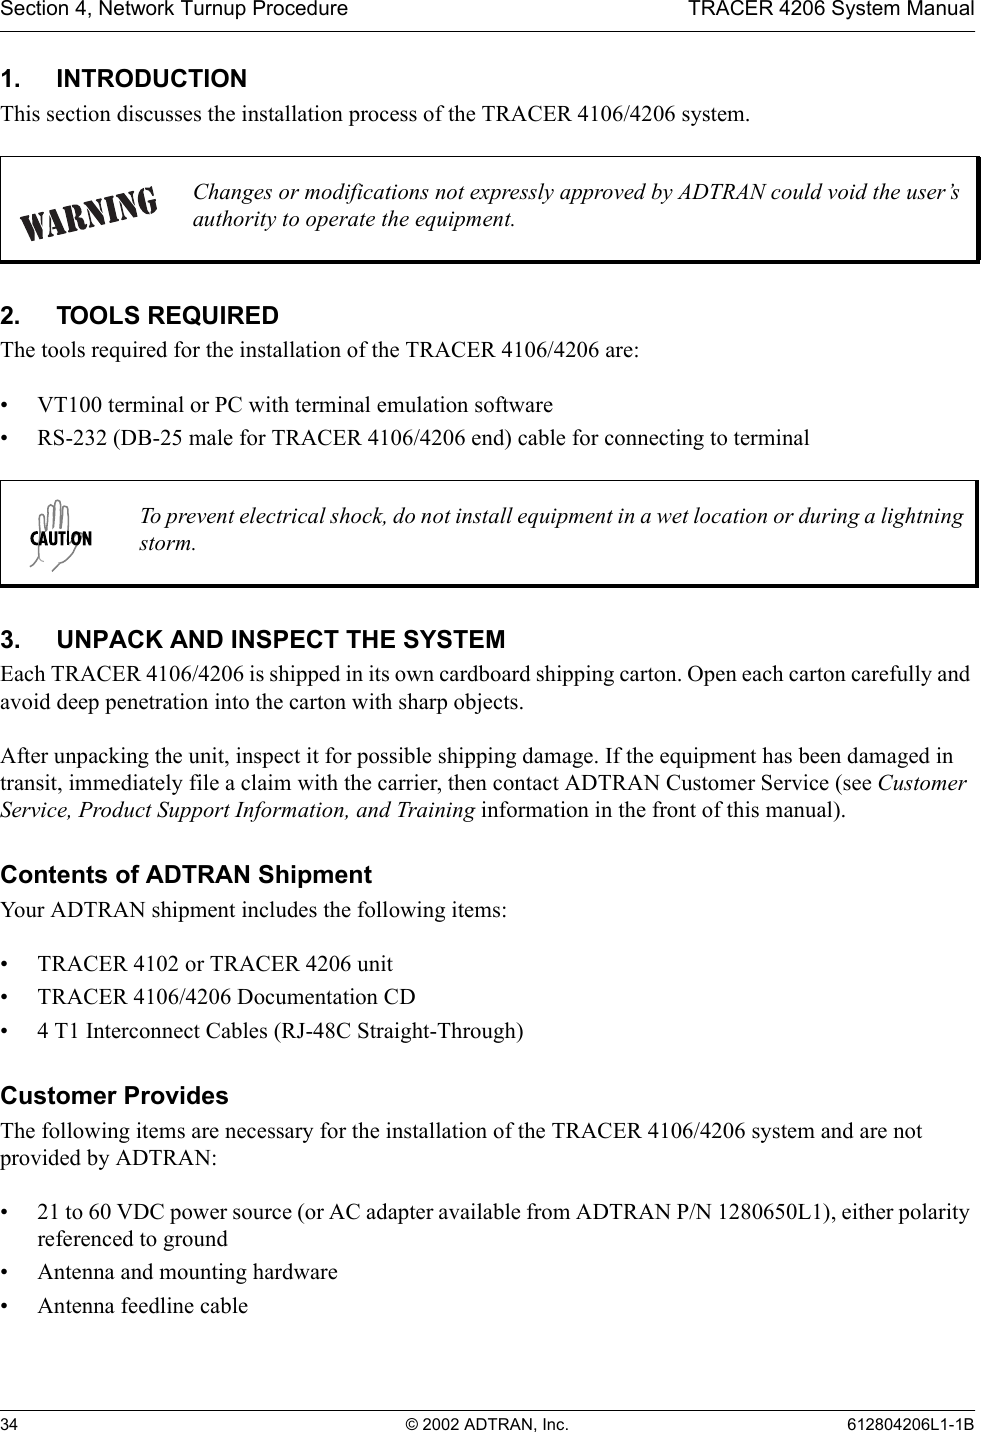 Section 4, Network Turnup Procedure TRACER 4206 System Manual34 © 2002 ADTRAN, Inc. 612804206L1-1B1. INTRODUCTIONThis section discusses the installation process of the TRACER 4106/4206 system.2. TOOLS REQUIREDThe tools required for the installation of the TRACER 4106/4206 are:• VT100 terminal or PC with terminal emulation software• RS-232 (DB-25 male for TRACER 4106/4206 end) cable for connecting to terminal3. UNPACK AND INSPECT THE SYSTEMEach TRACER 4106/4206 is shipped in its own cardboard shipping carton. Open each carton carefully and avoid deep penetration into the carton with sharp objects. After unpacking the unit, inspect it for possible shipping damage. If the equipment has been damaged in transit, immediately file a claim with the carrier, then contact ADTRAN Customer Service (see Customer Service, Product Support Information, and Training information in the front of this manual).Contents of ADTRAN ShipmentYour ADTRAN shipment includes the following items:• TRACER 4102 or TRACER 4206 unit• TRACER 4106/4206 Documentation CD• 4 T1 Interconnect Cables (RJ-48C Straight-Through)Customer ProvidesThe following items are necessary for the installation of the TRACER 4106/4206 system and are not provided by ADTRAN:• 21 to 60 VDC power source (or AC adapter available from ADTRAN P/N 1280650L1), either polarity referenced to ground• Antenna and mounting hardware• Antenna feedline cableChanges or modifications not expressly approved by ADTRAN could void the user’s authority to operate the equipment.To prevent electrical shock, do not install equipment in a wet location or during a lightning storm.